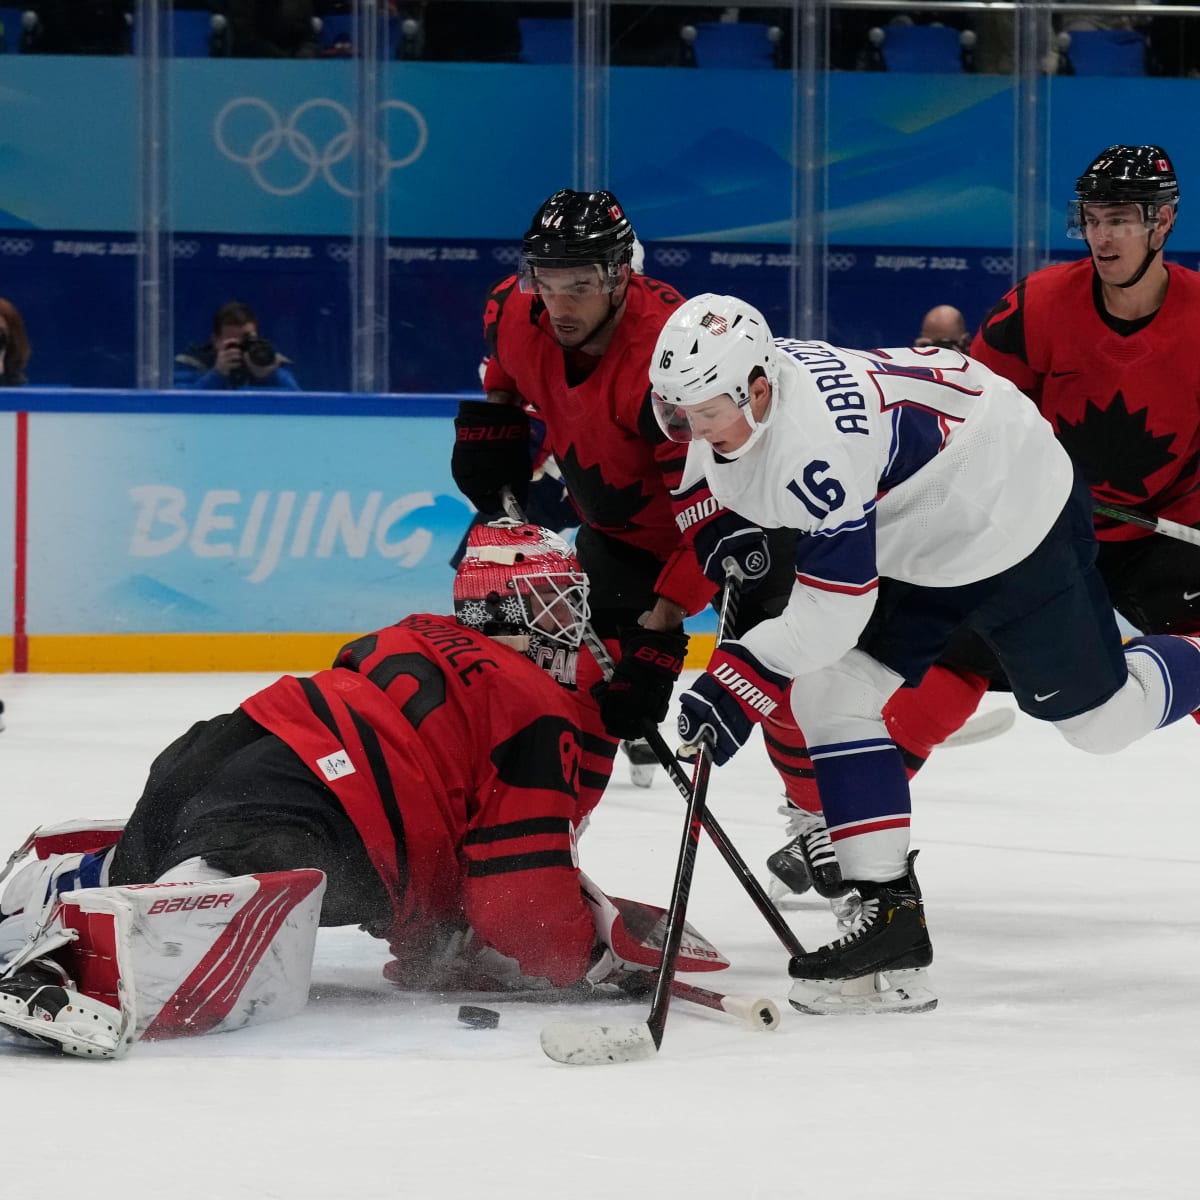 US Men's Hockey Team Beats Canada in Preliminary Game - The New